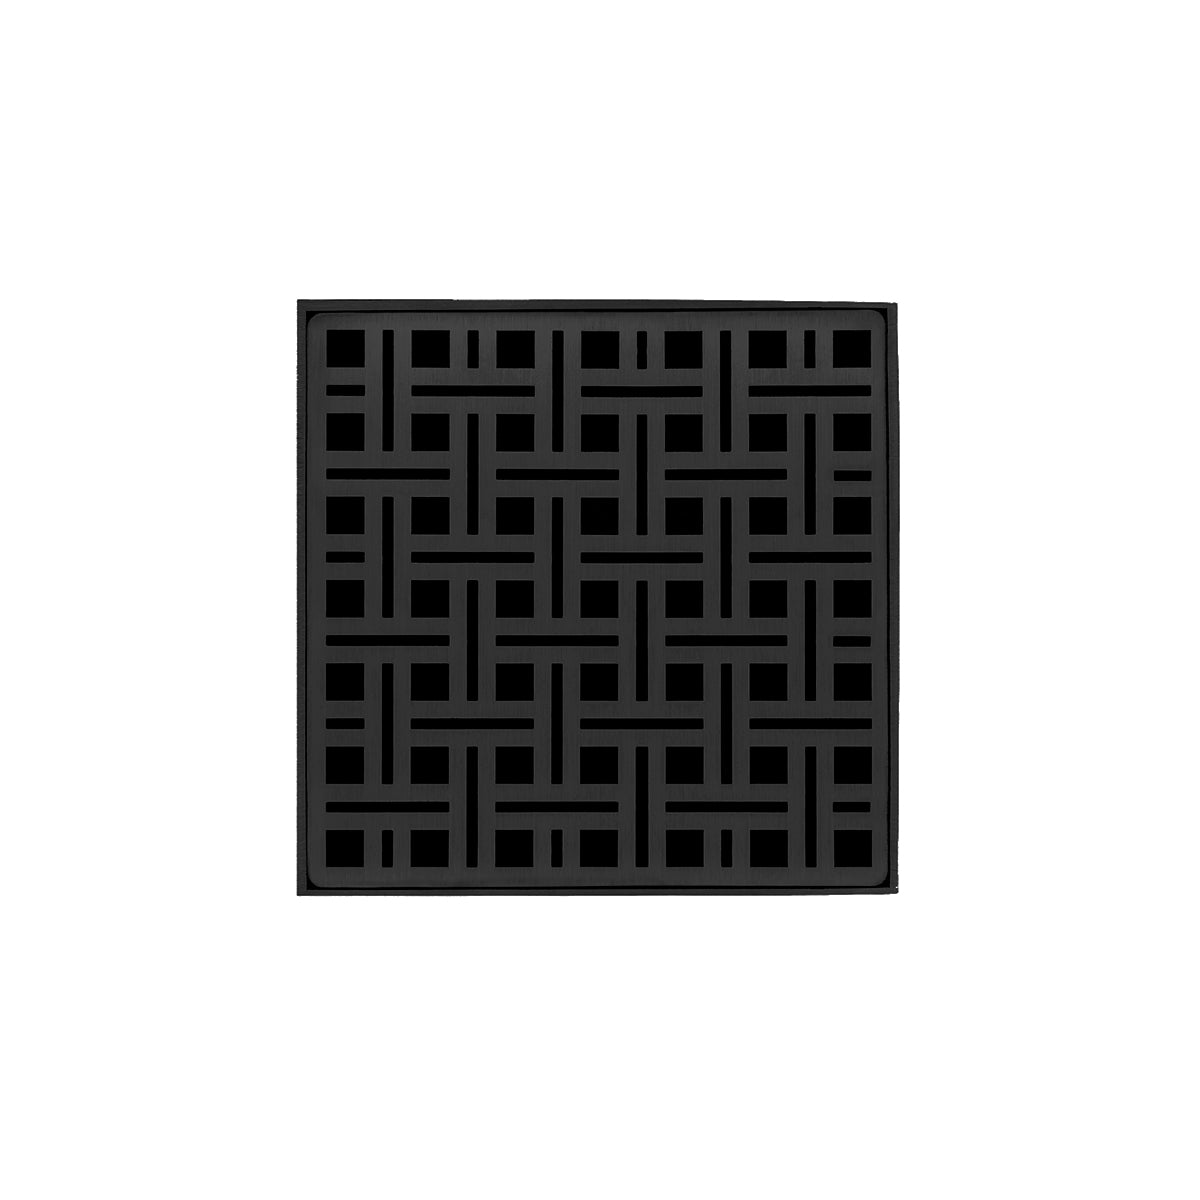 Infinity Drain 5" x 5" VD 5 Premium Center Drain Kit with Weave Pattern Decorative Plate with ABS Drain Body, 2" Outlet